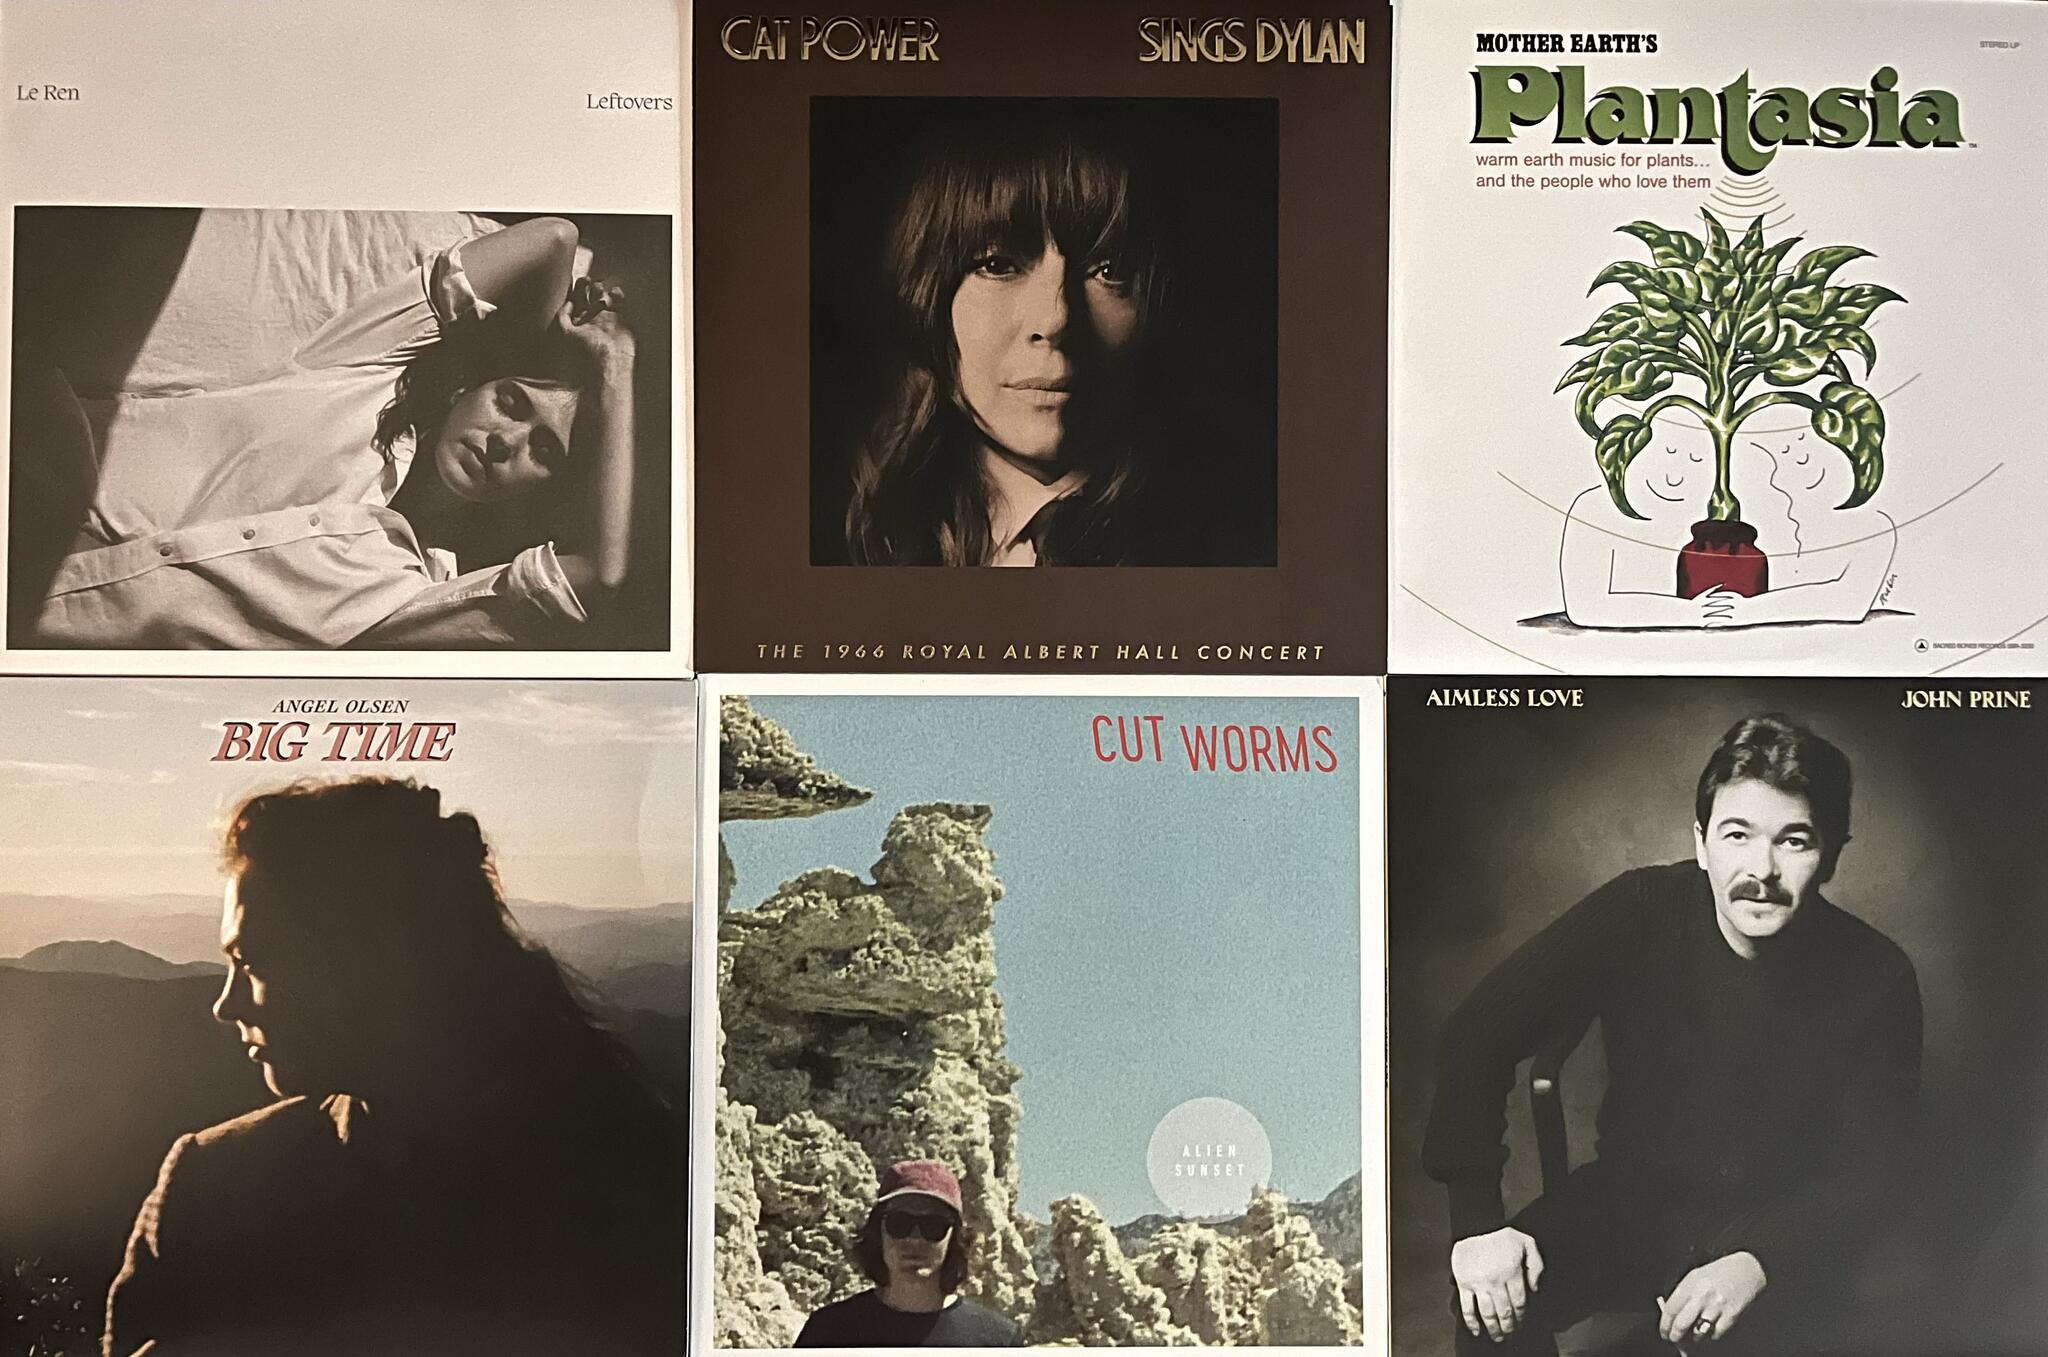 A compliation showing the covers of six different records. They are: Le Ren, Leftovers - Cat Power, Sings Dylan - Mort Garson, Mother Earth's Plantasia - Cut Worms, Alien Sunset - Angel Olsen, Big Time - John Prine, Aimless Love